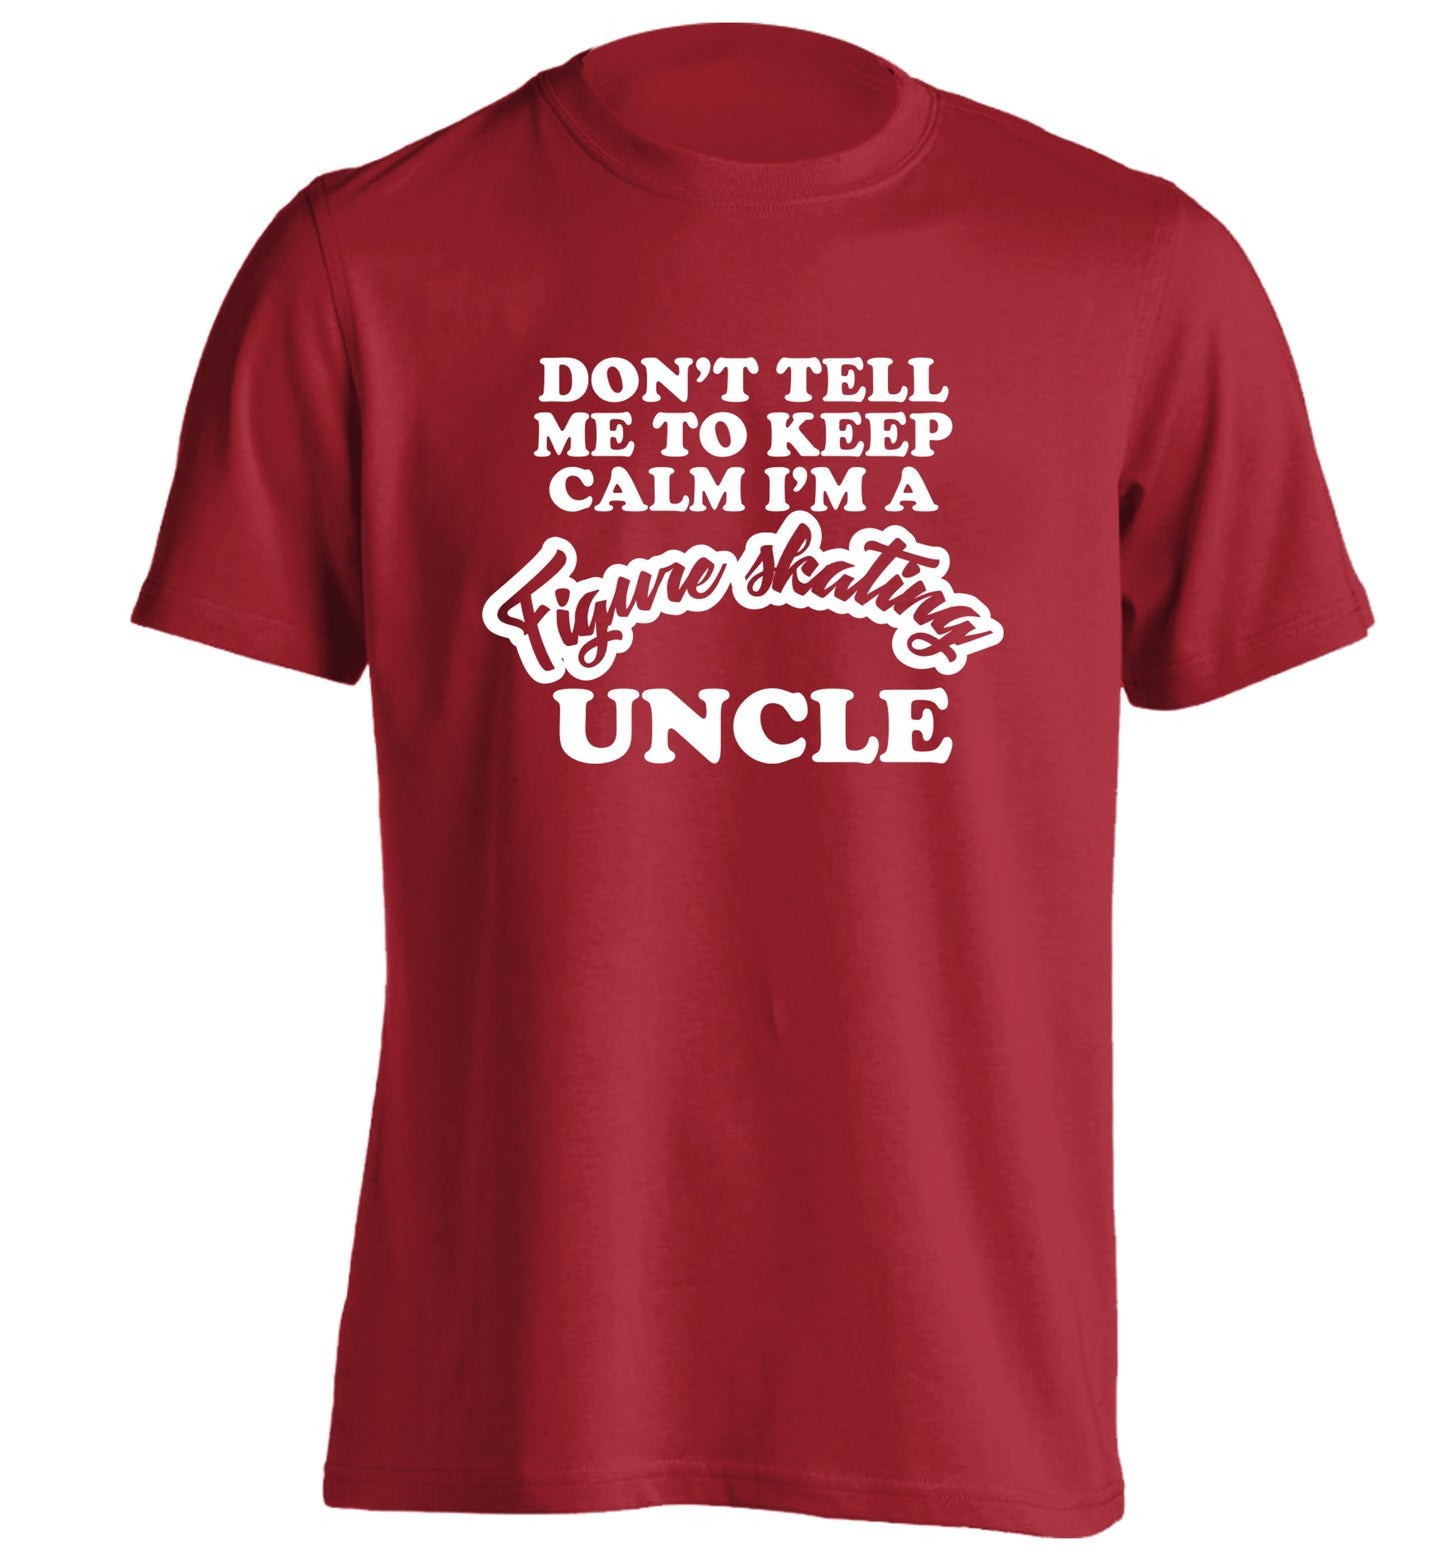 Don't tell me to keep calm I'm a figure skating uncle adults unisexred Tshirt 2XL